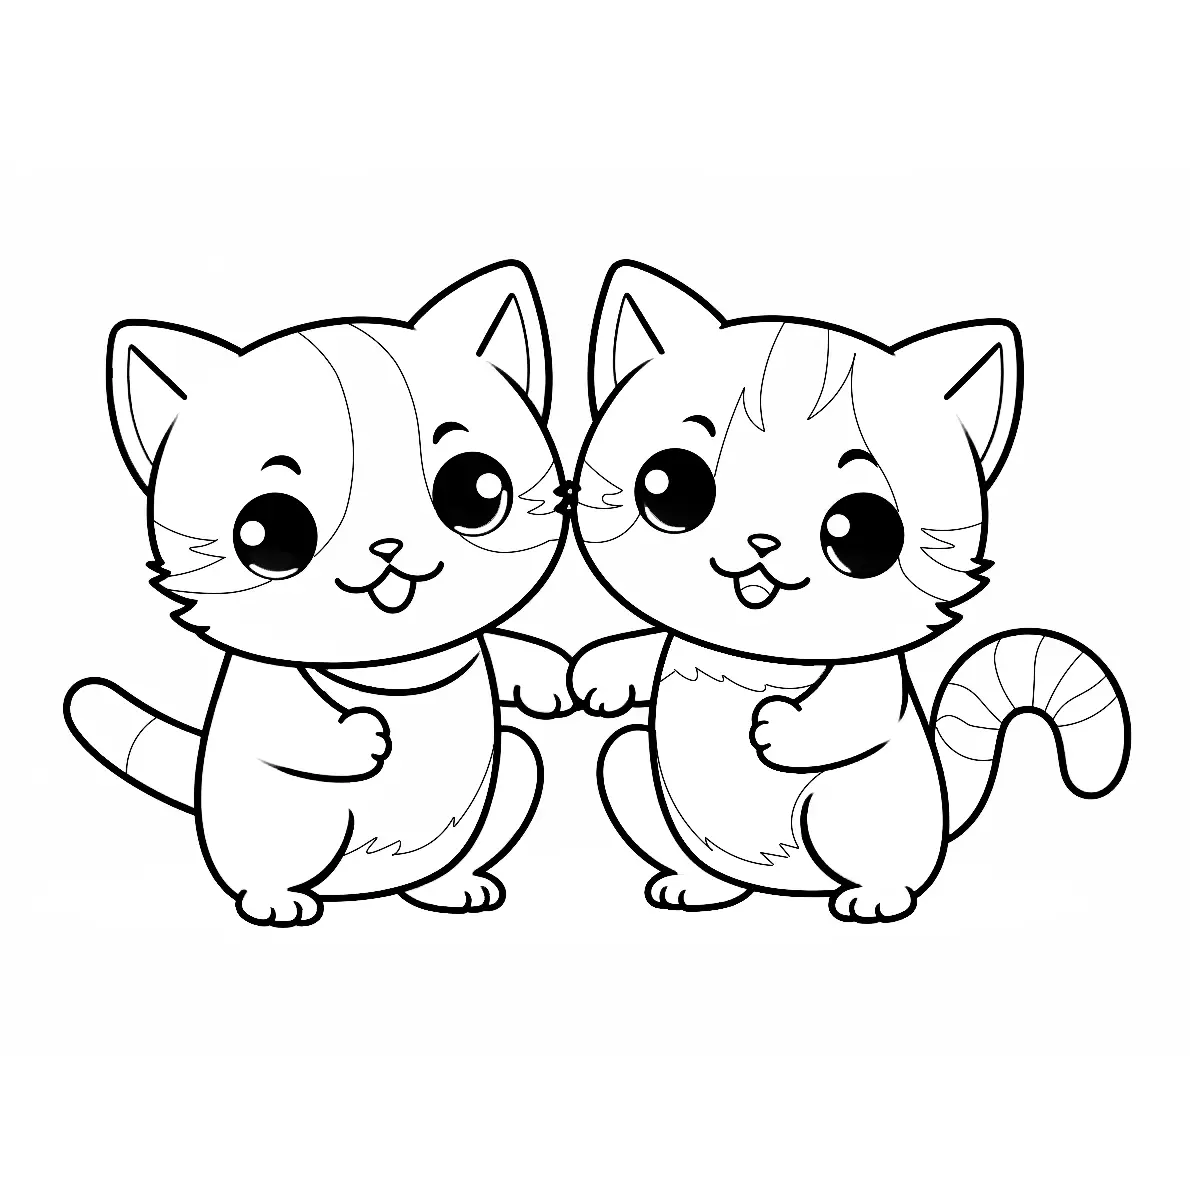 Two Kitties Coloring Page Black & White